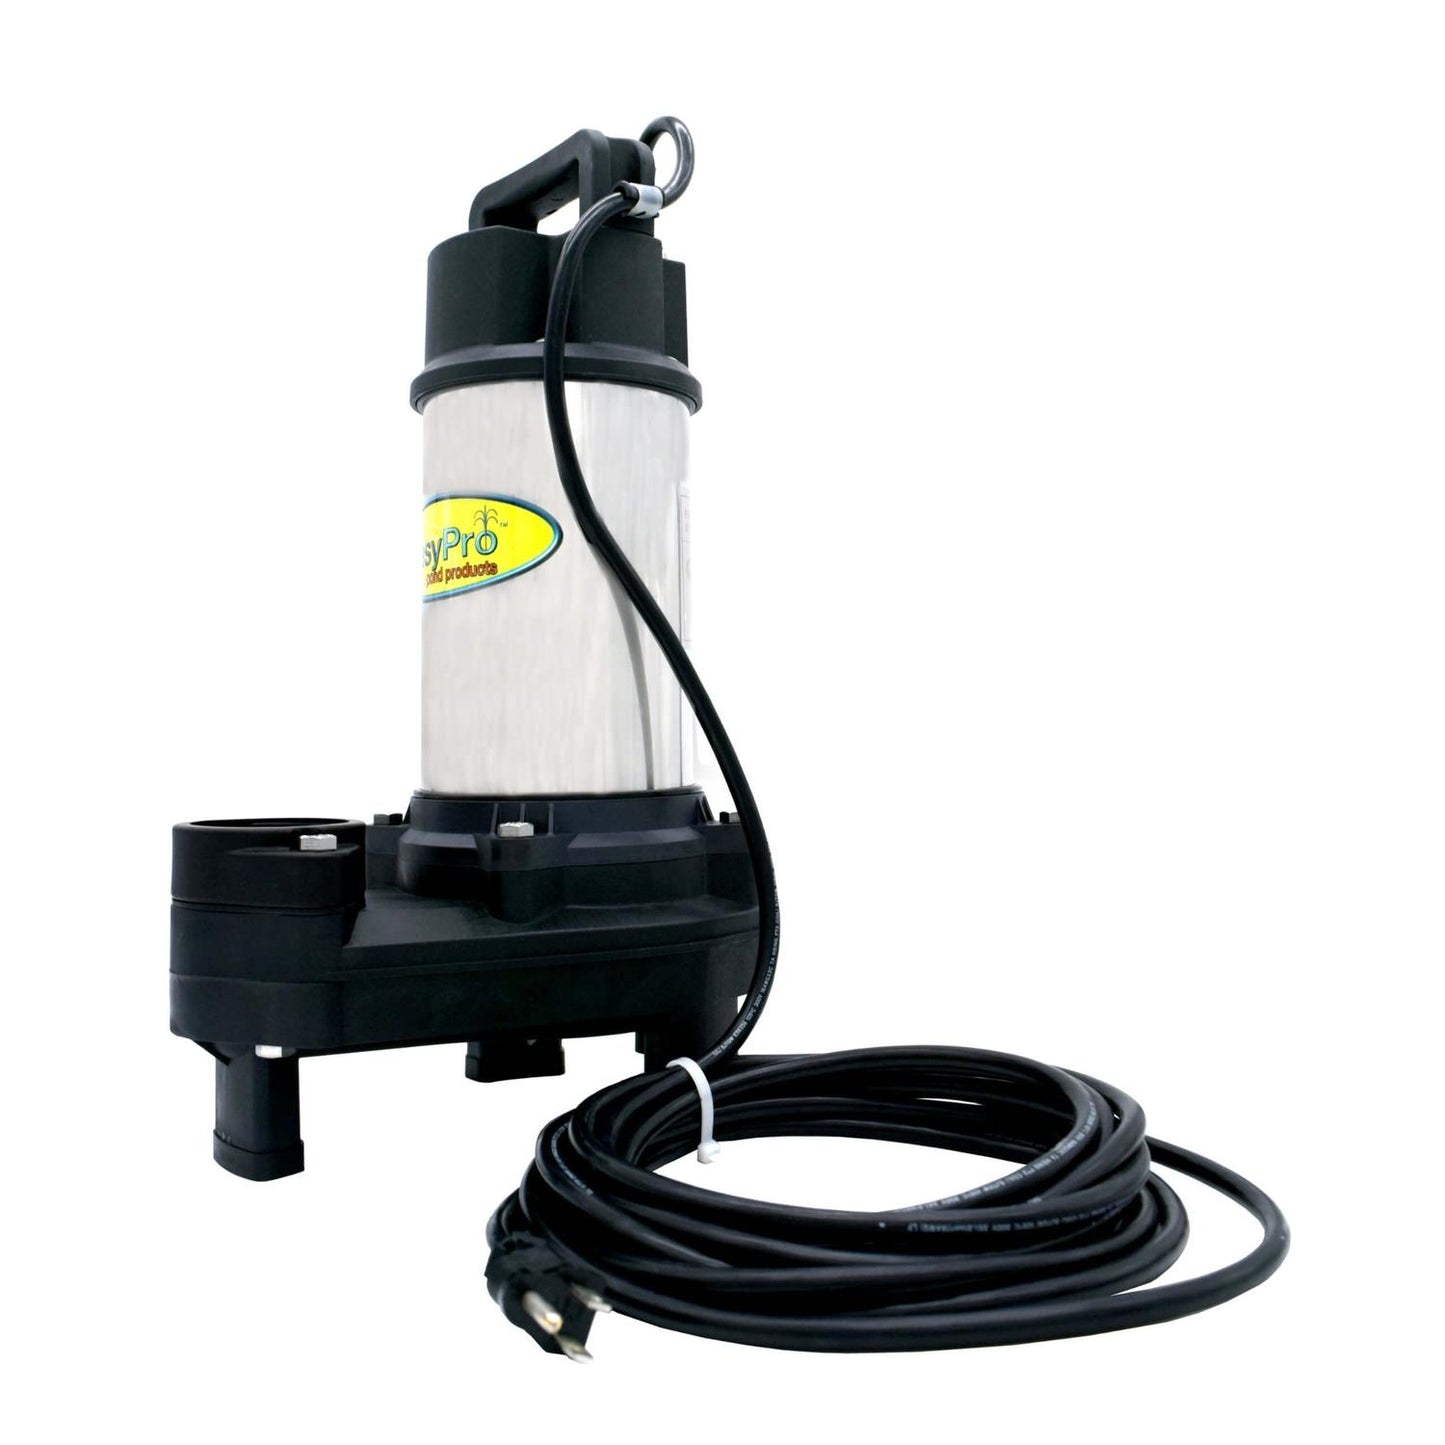 Easypro TH Series Stainless Steel Submersible Pond and Waterfall Pump